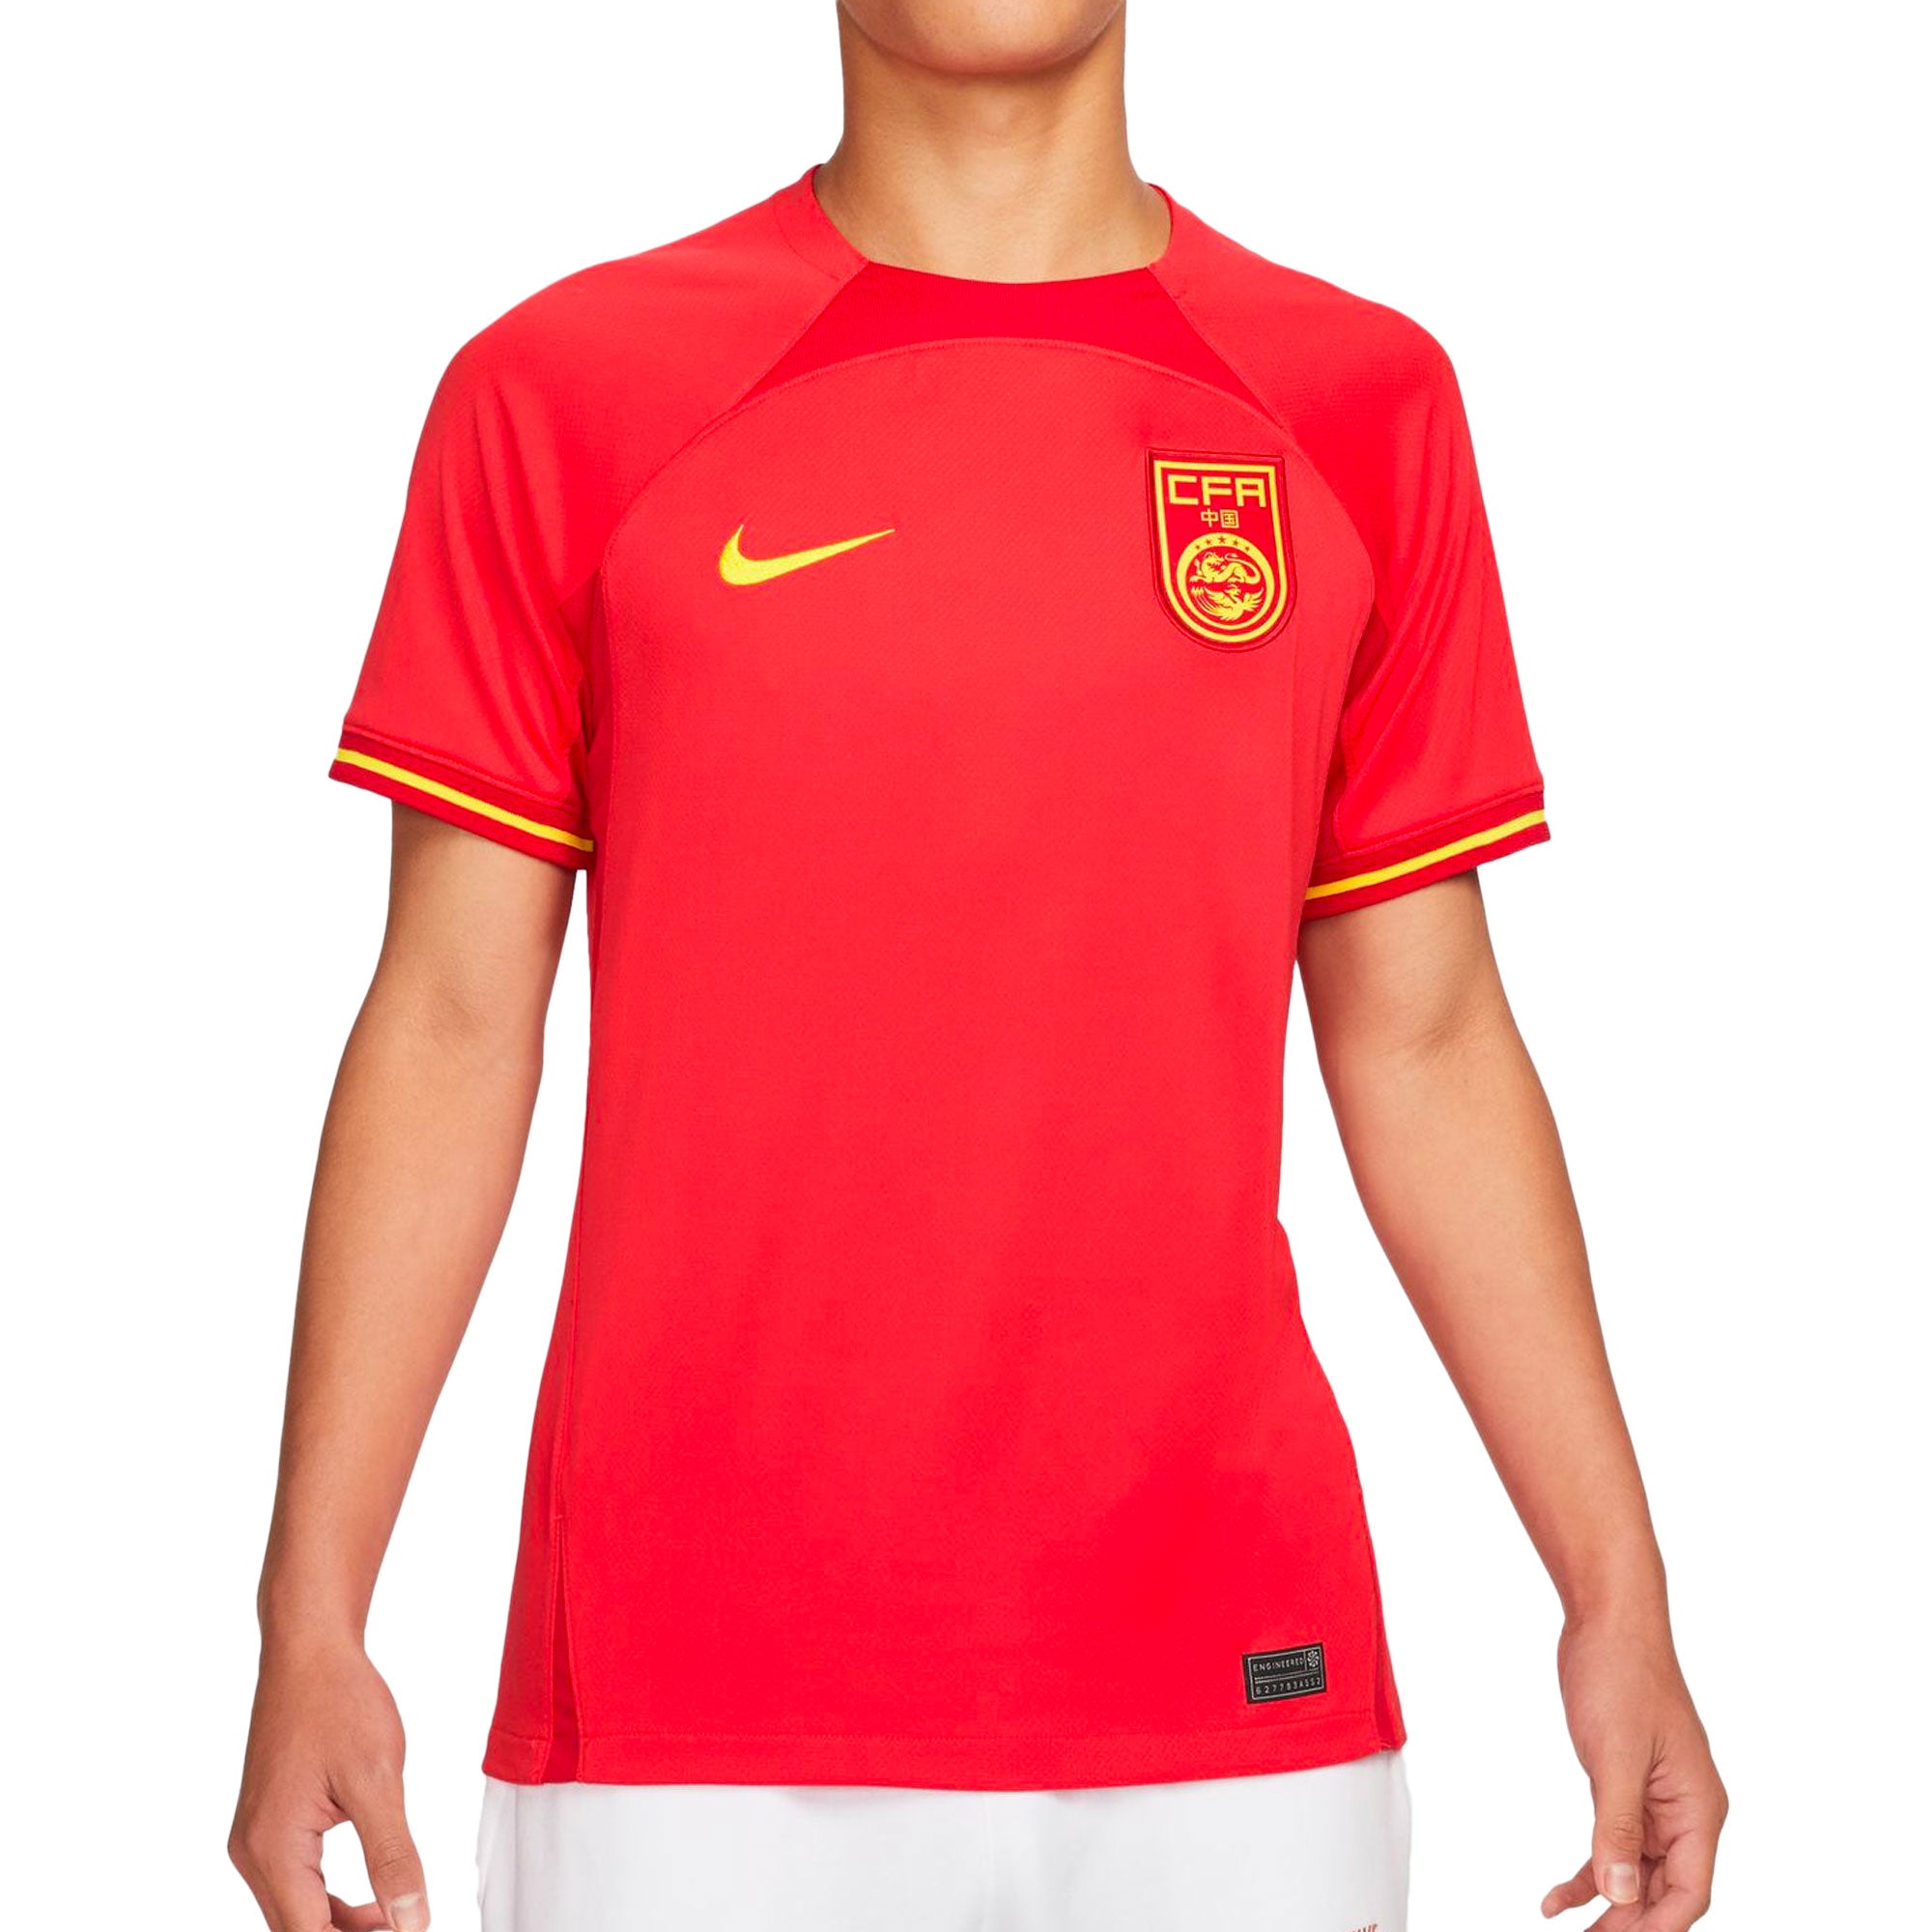 Source Club sportswear red and white soccer jerseys china cheap plain  football shirts on m.